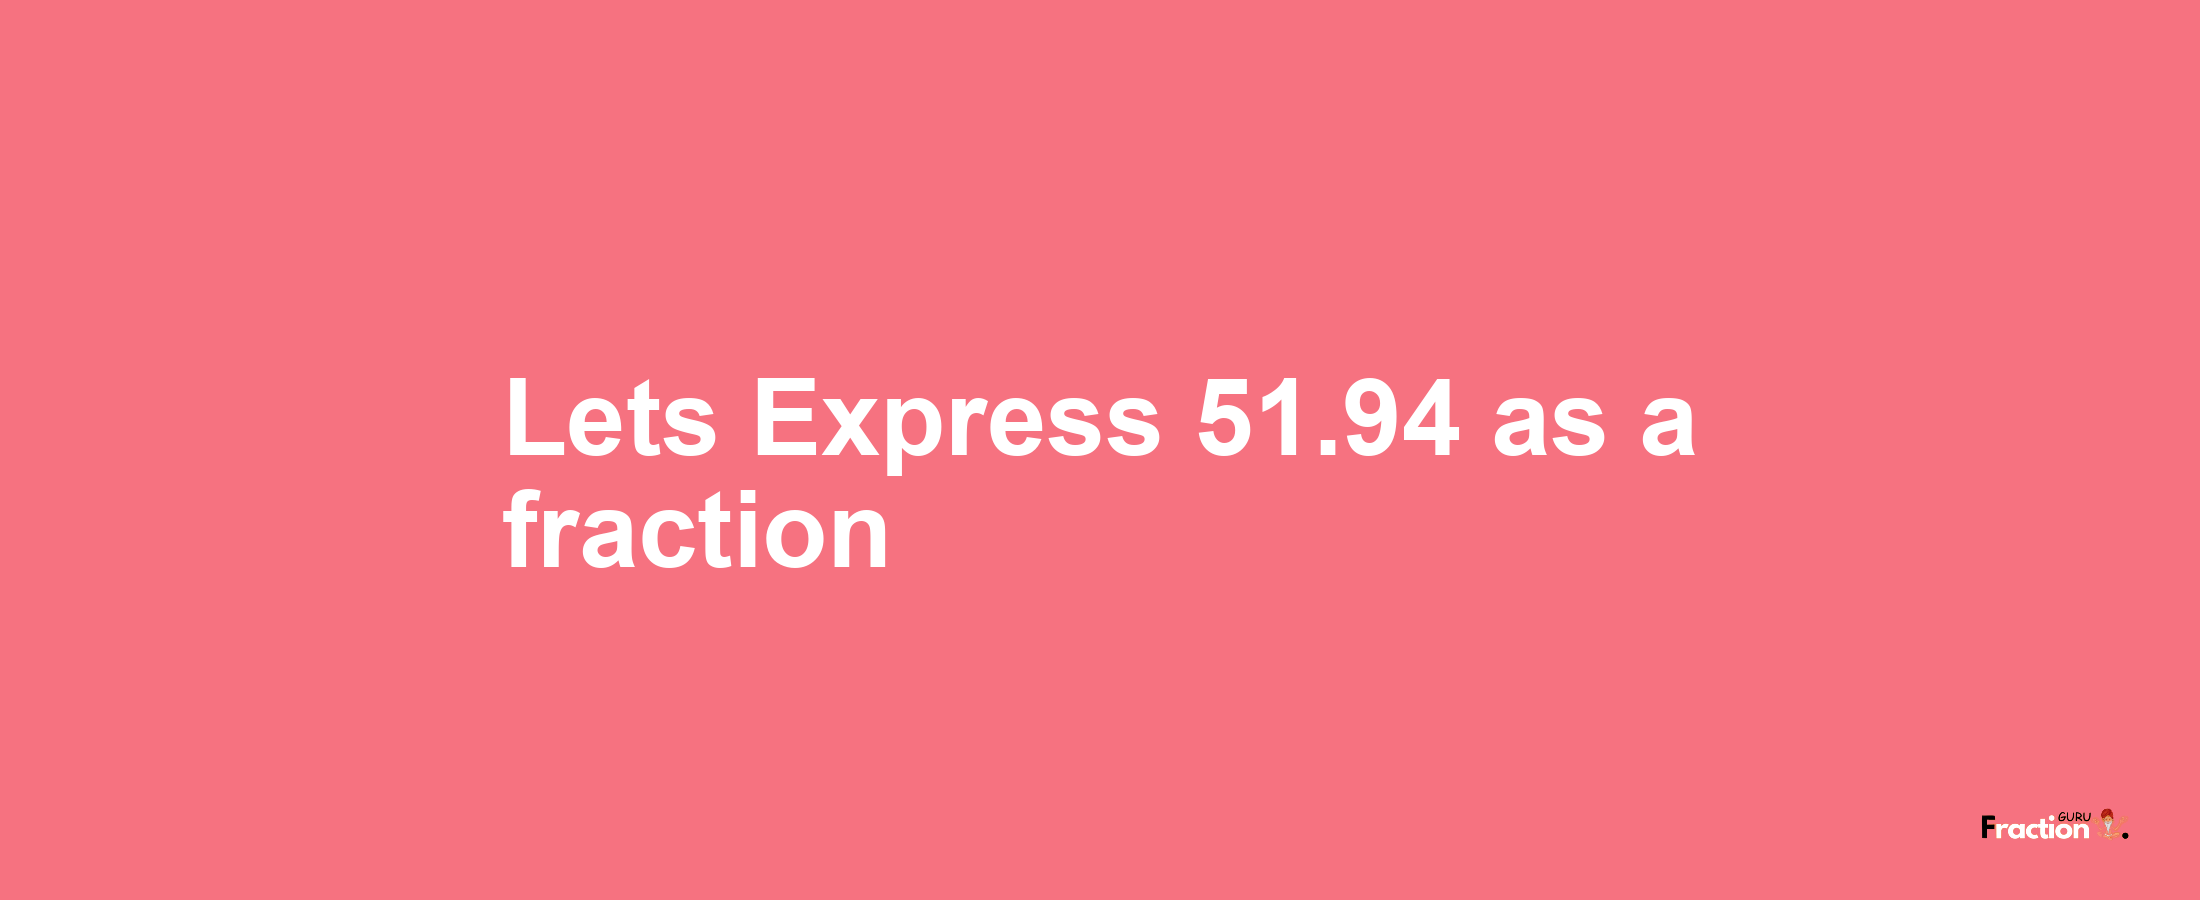 Lets Express 51.94 as afraction